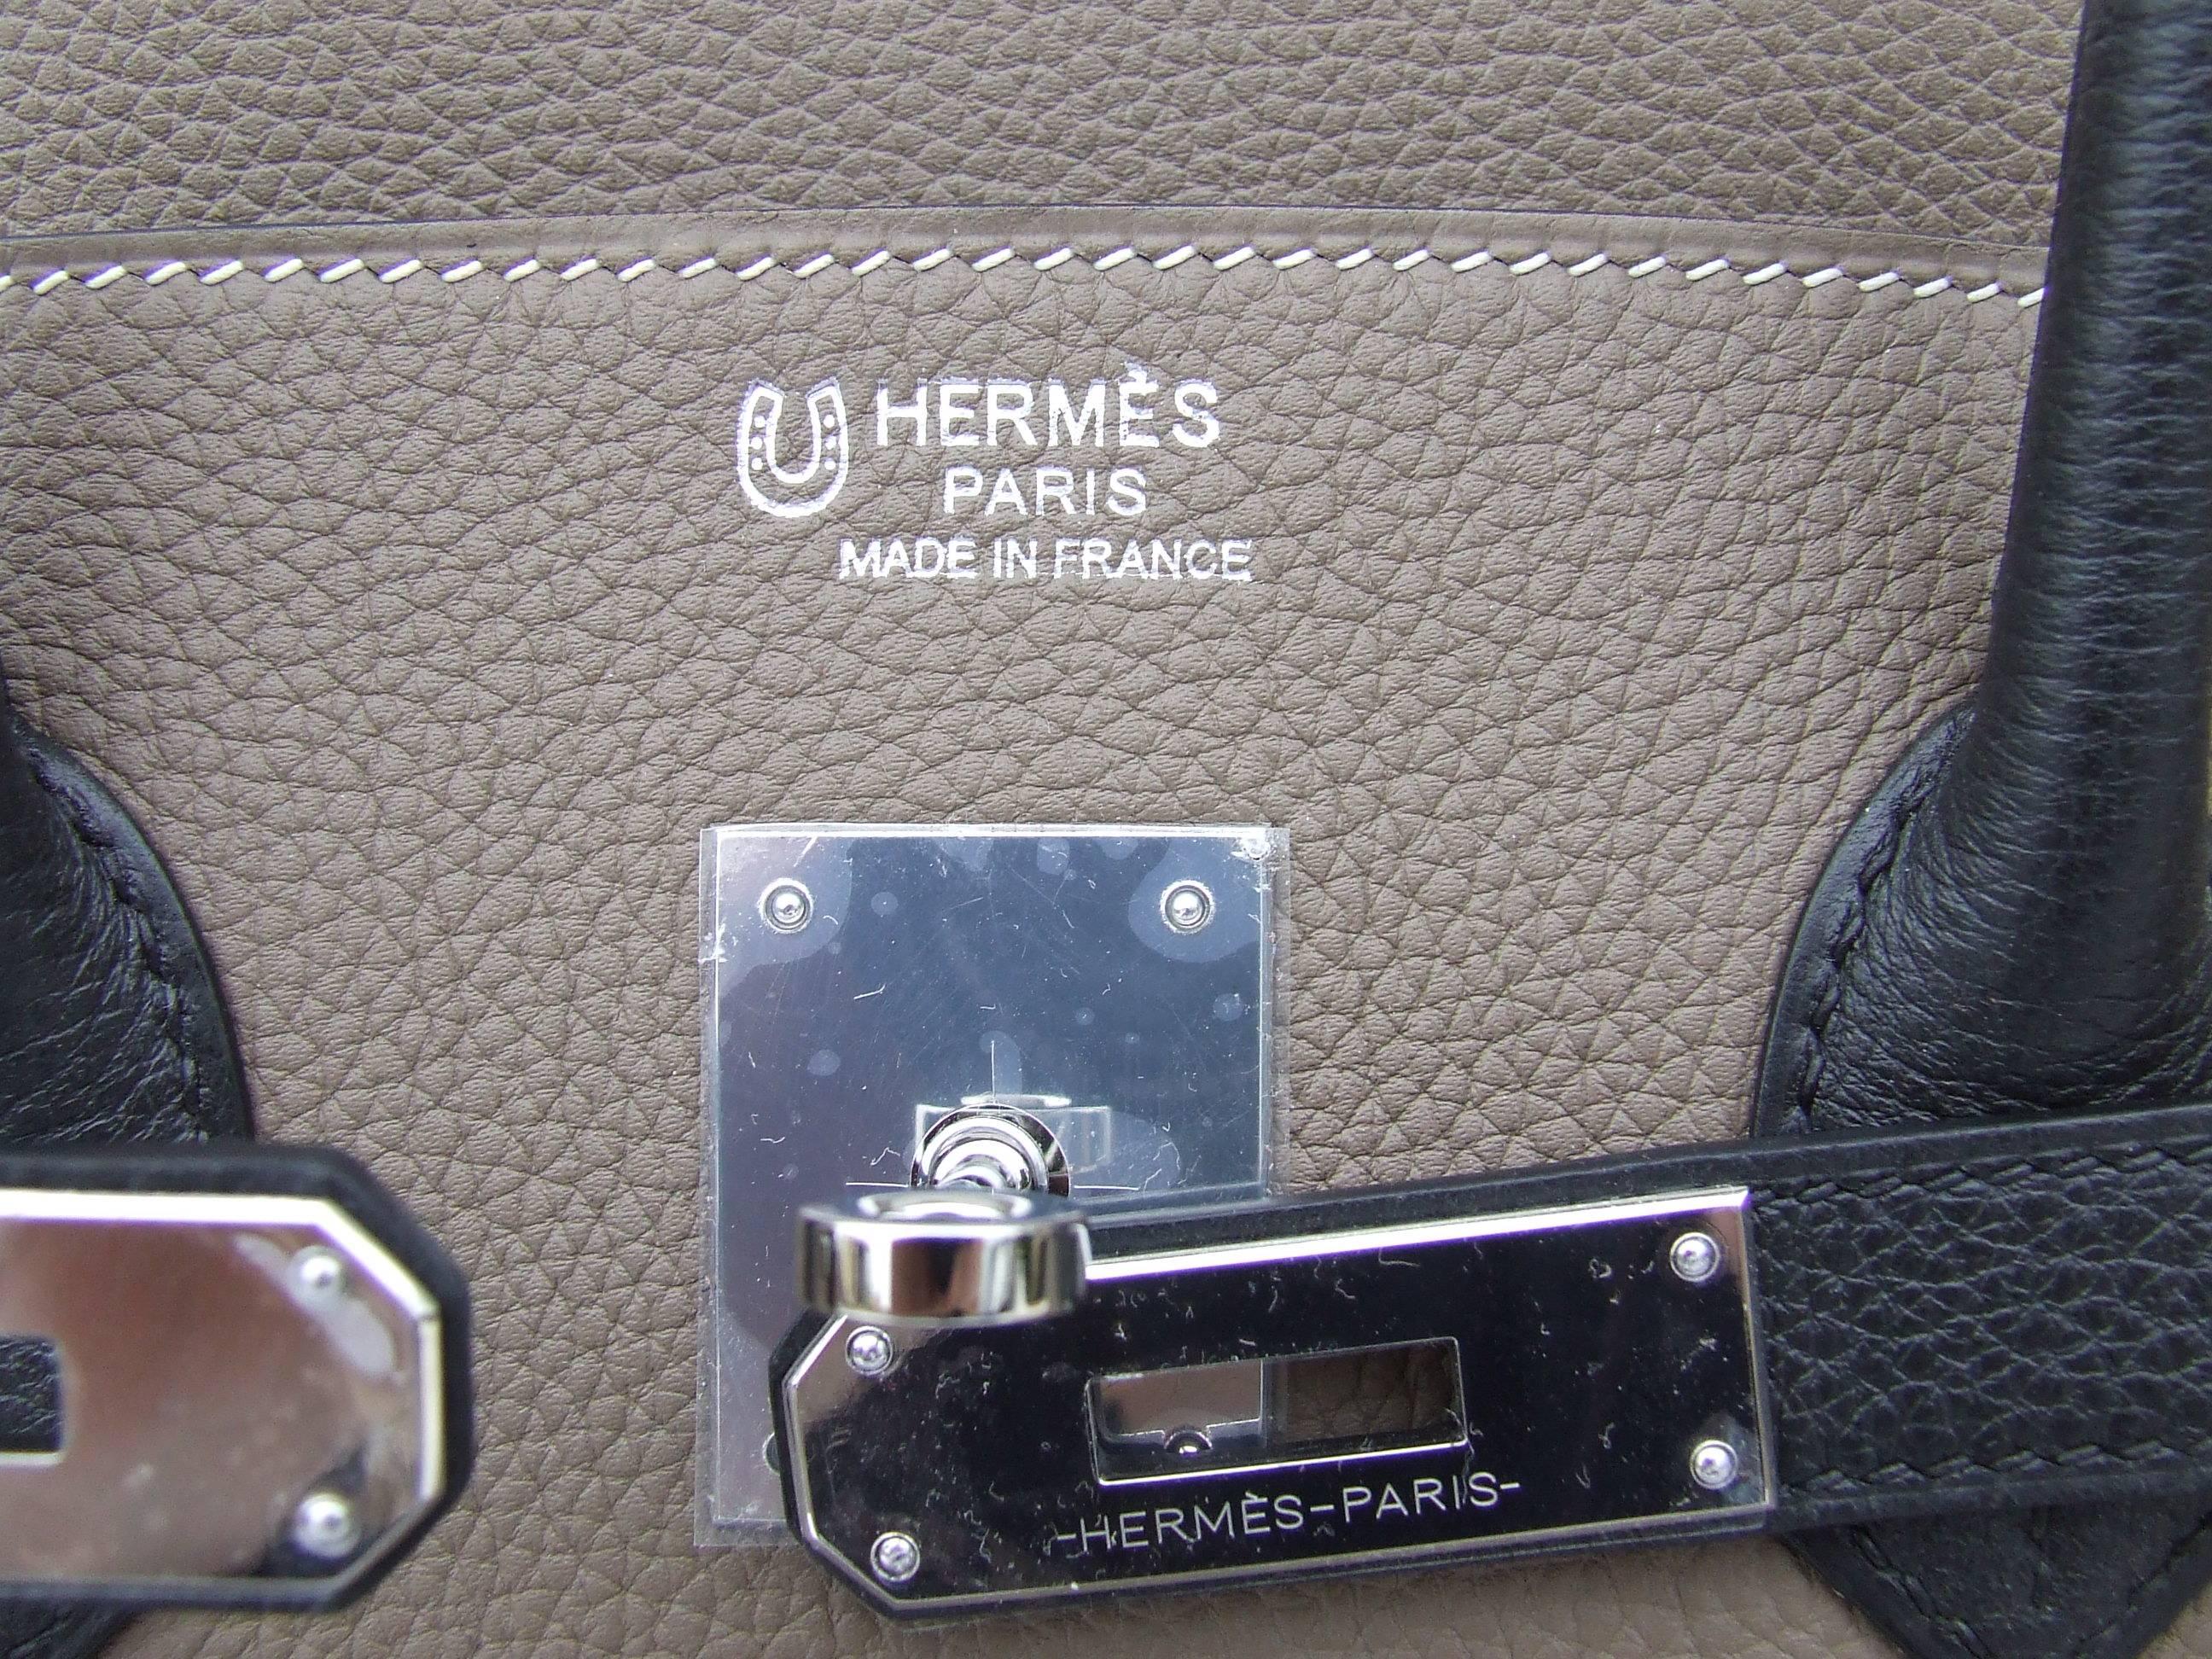 Exceptionnal and rare Authentic Hermes Bag

